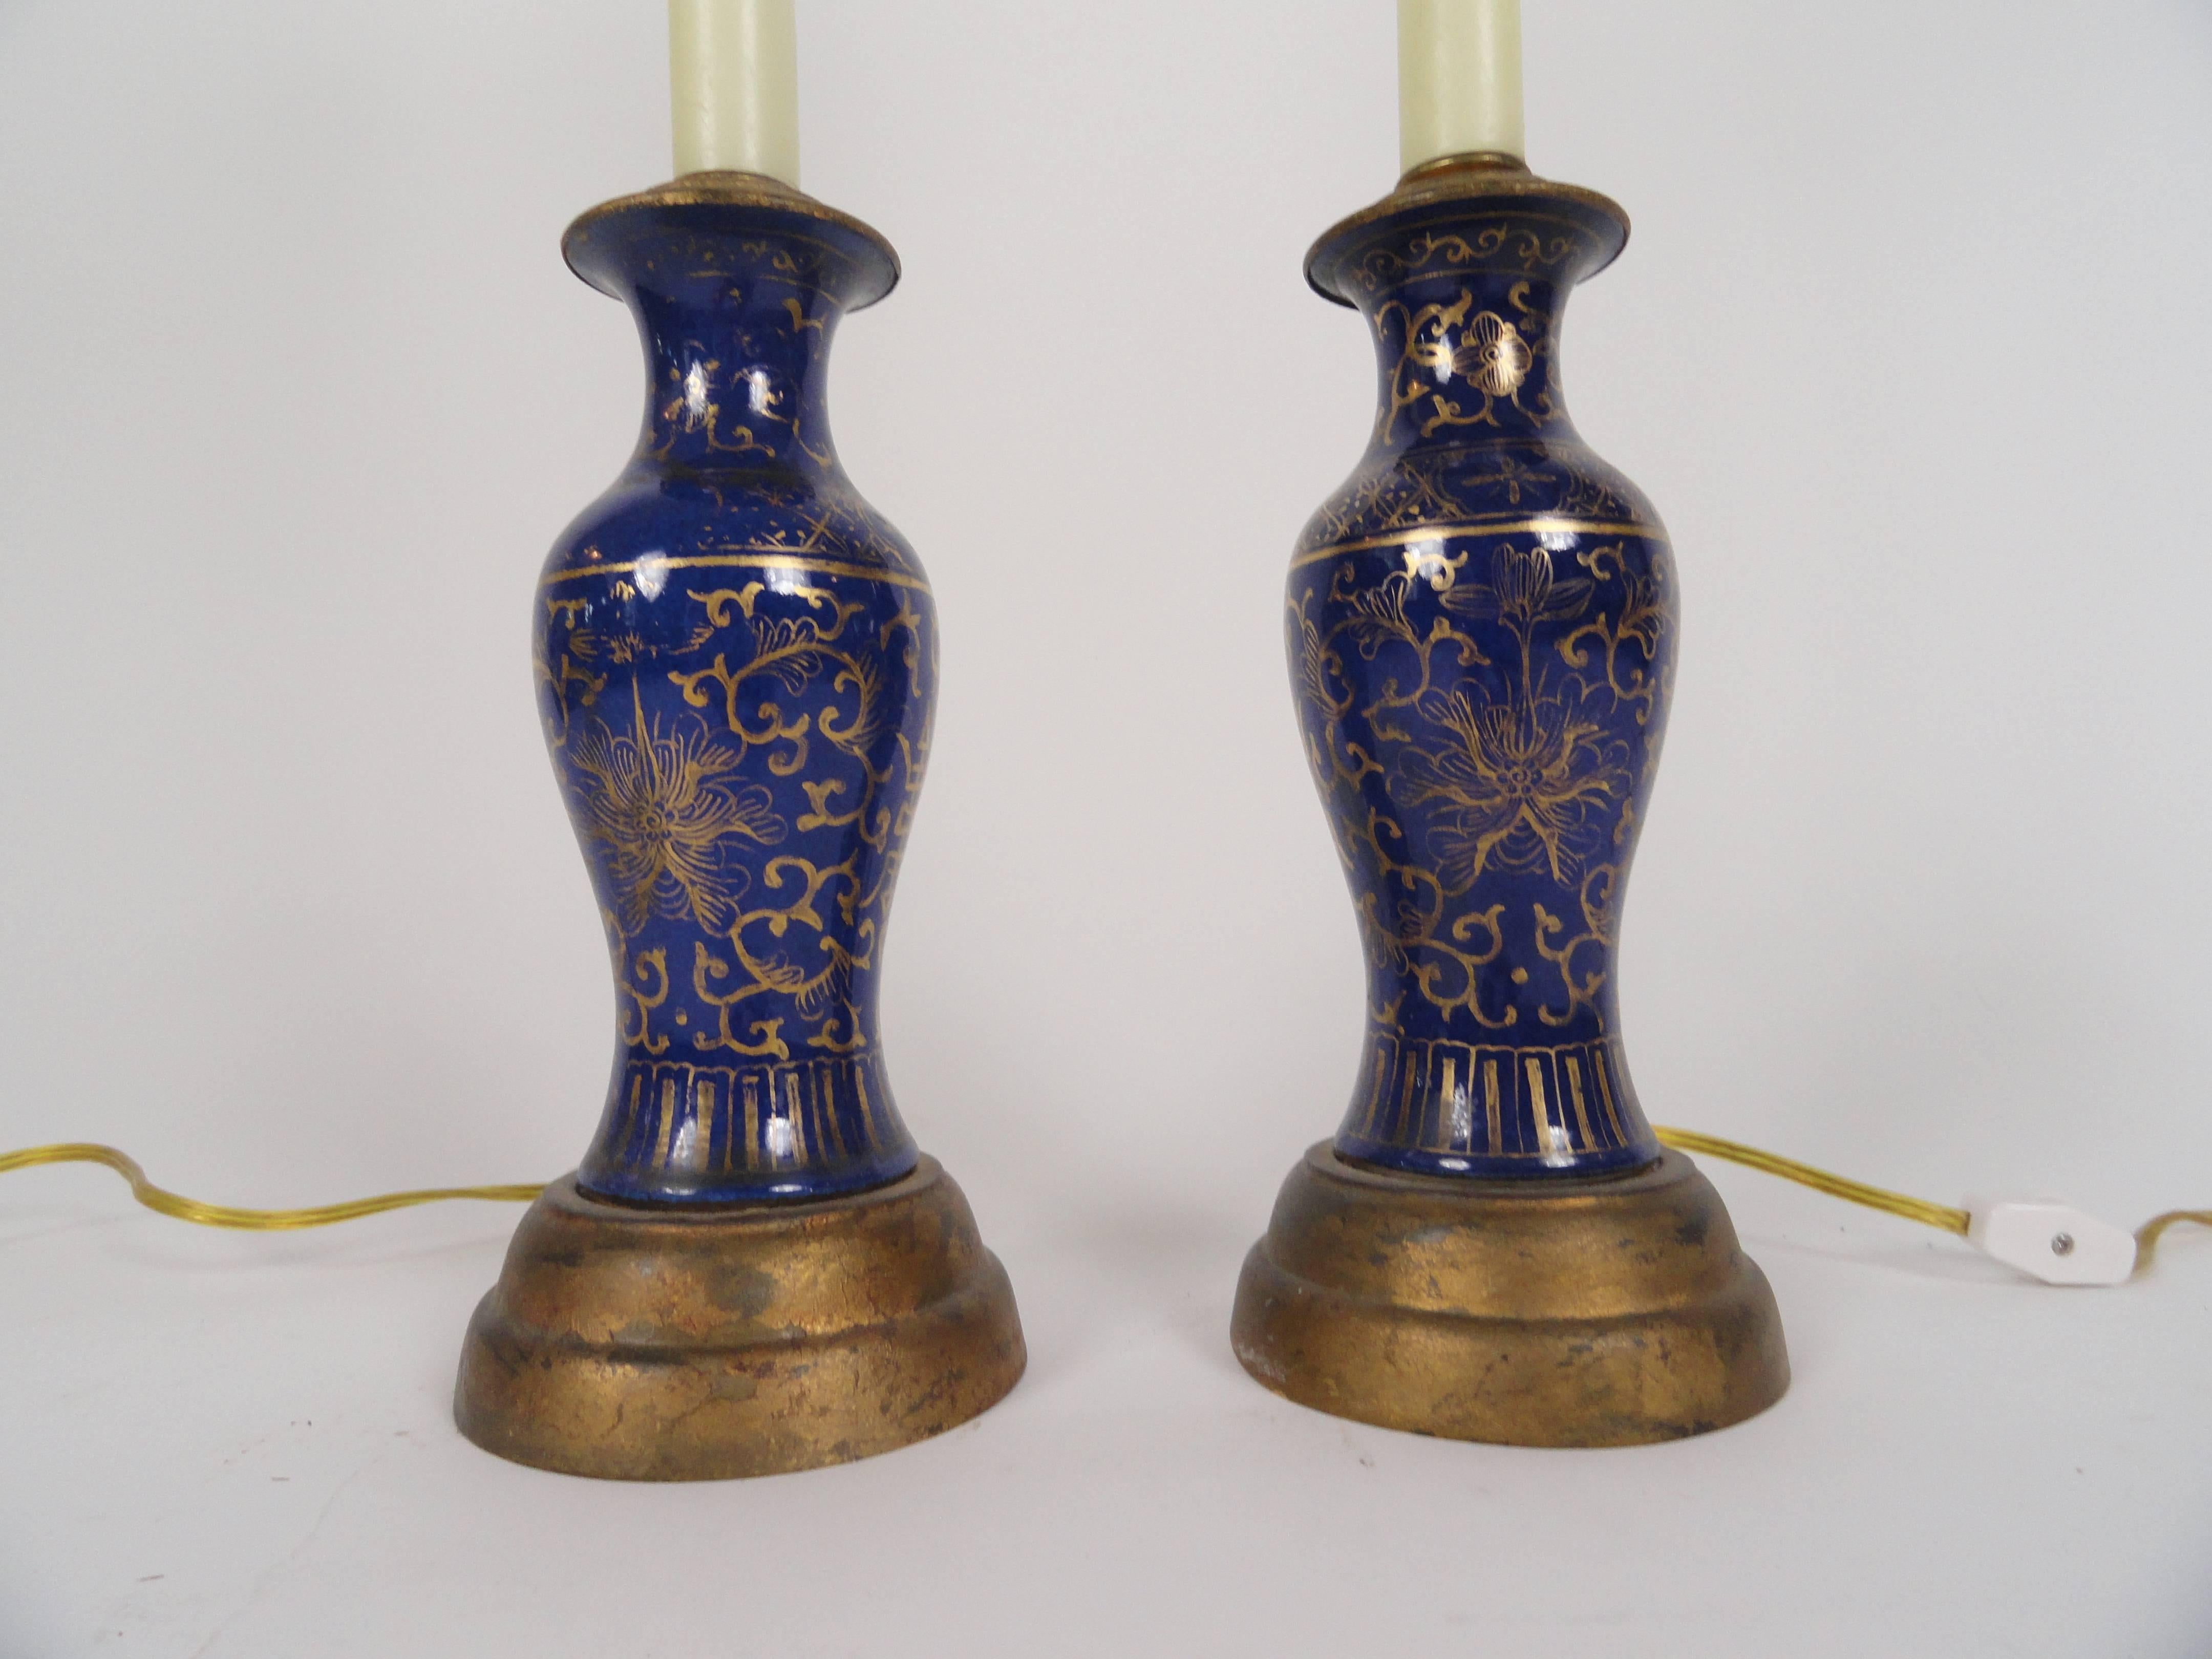 Pair of oriental powder blue candlestick lamps on gold bases. Fortuny half shades. Newly rewired with inline switches.
Measure: Height is 22